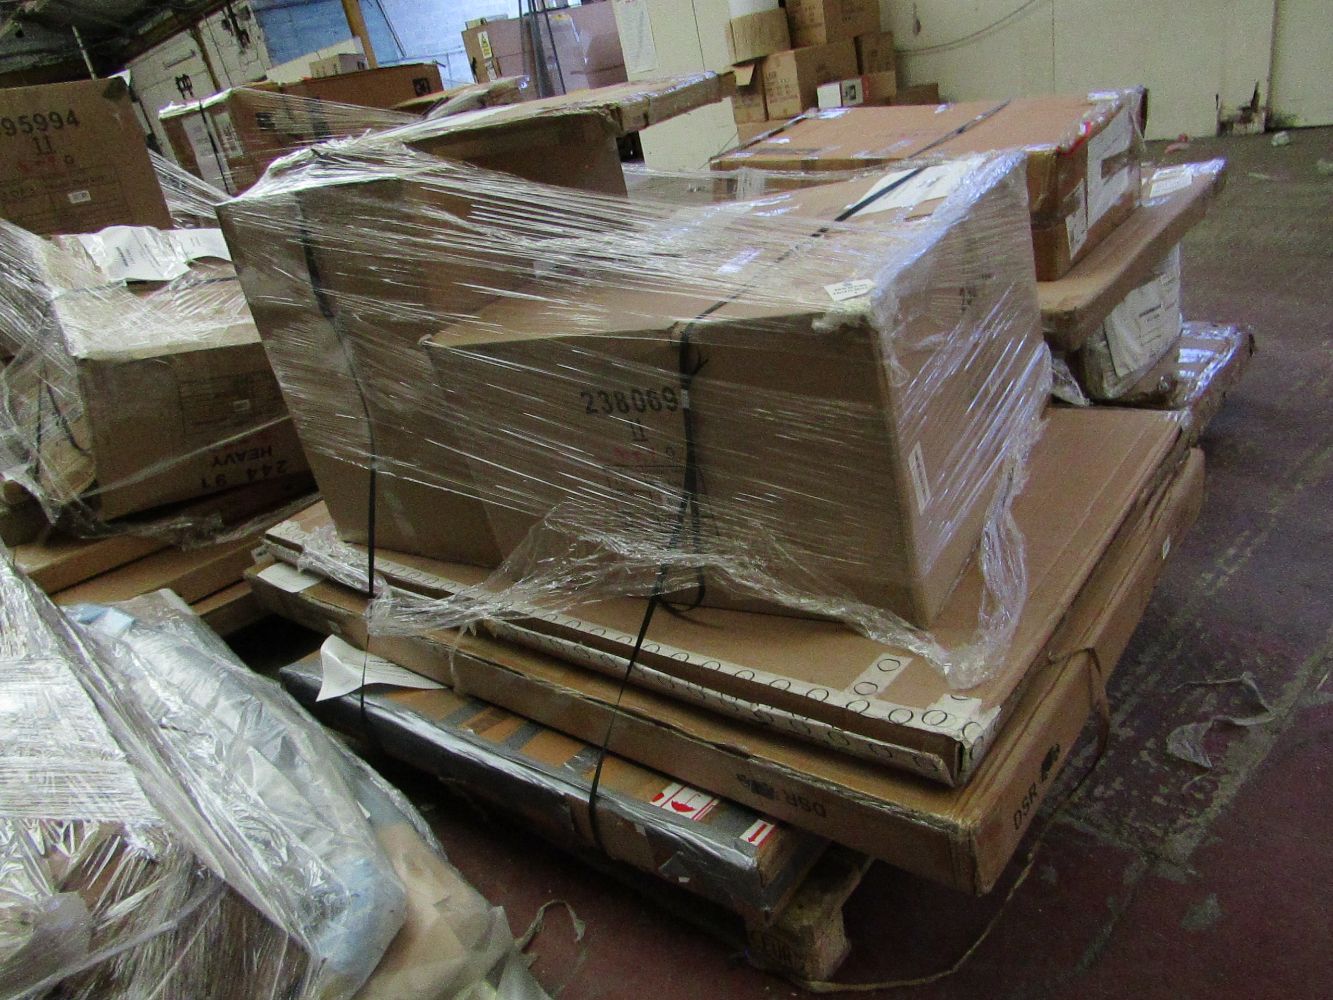 PALLETS OF UNWORKED RAW CUSTOMER RETURNS FROM MOOT, SWOON AND MUCH MORE...